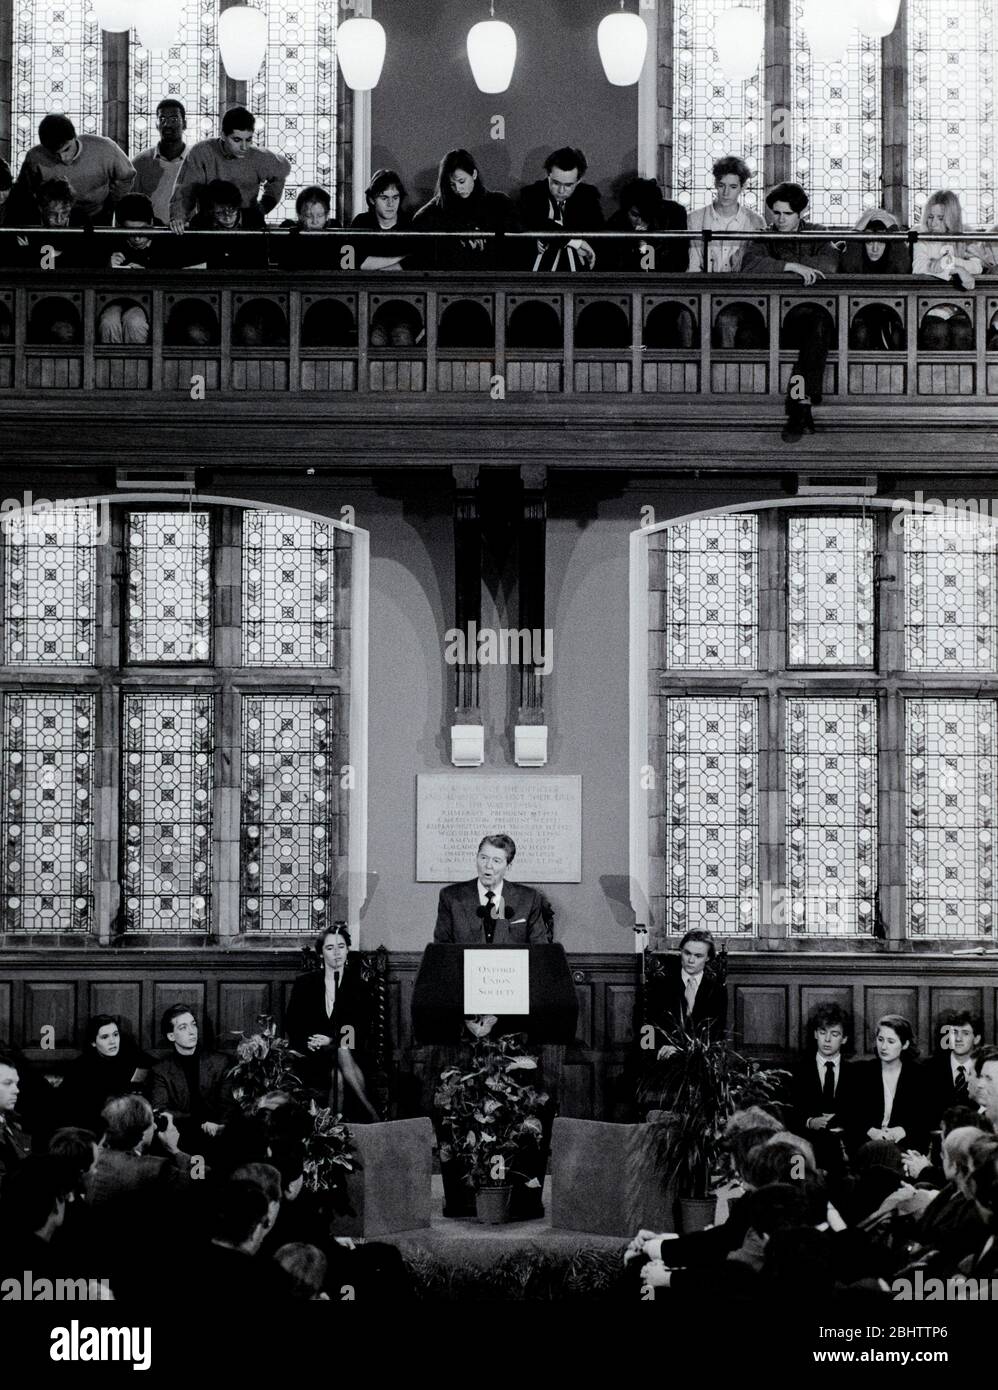 Former President of the USA Ronald Reagan speaks at the Oxford Union Society. Behind him is Chris Hall, president of the Oxford Union Society. Stock Photo